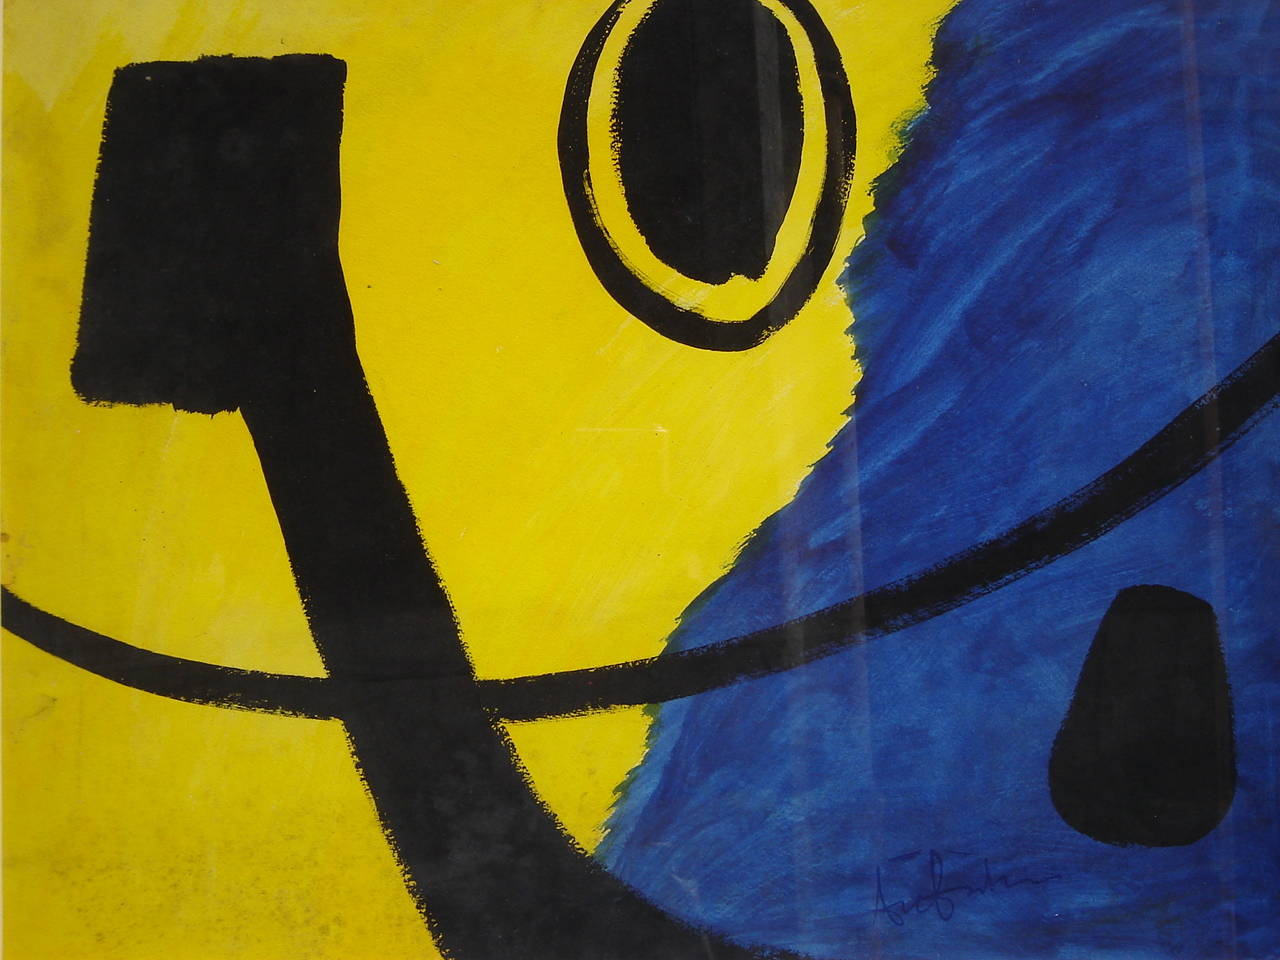 Blue, yellow and black gouache composition by Ange Falchi, incredible 20th artist (1913-1997). See attached photos with biography.